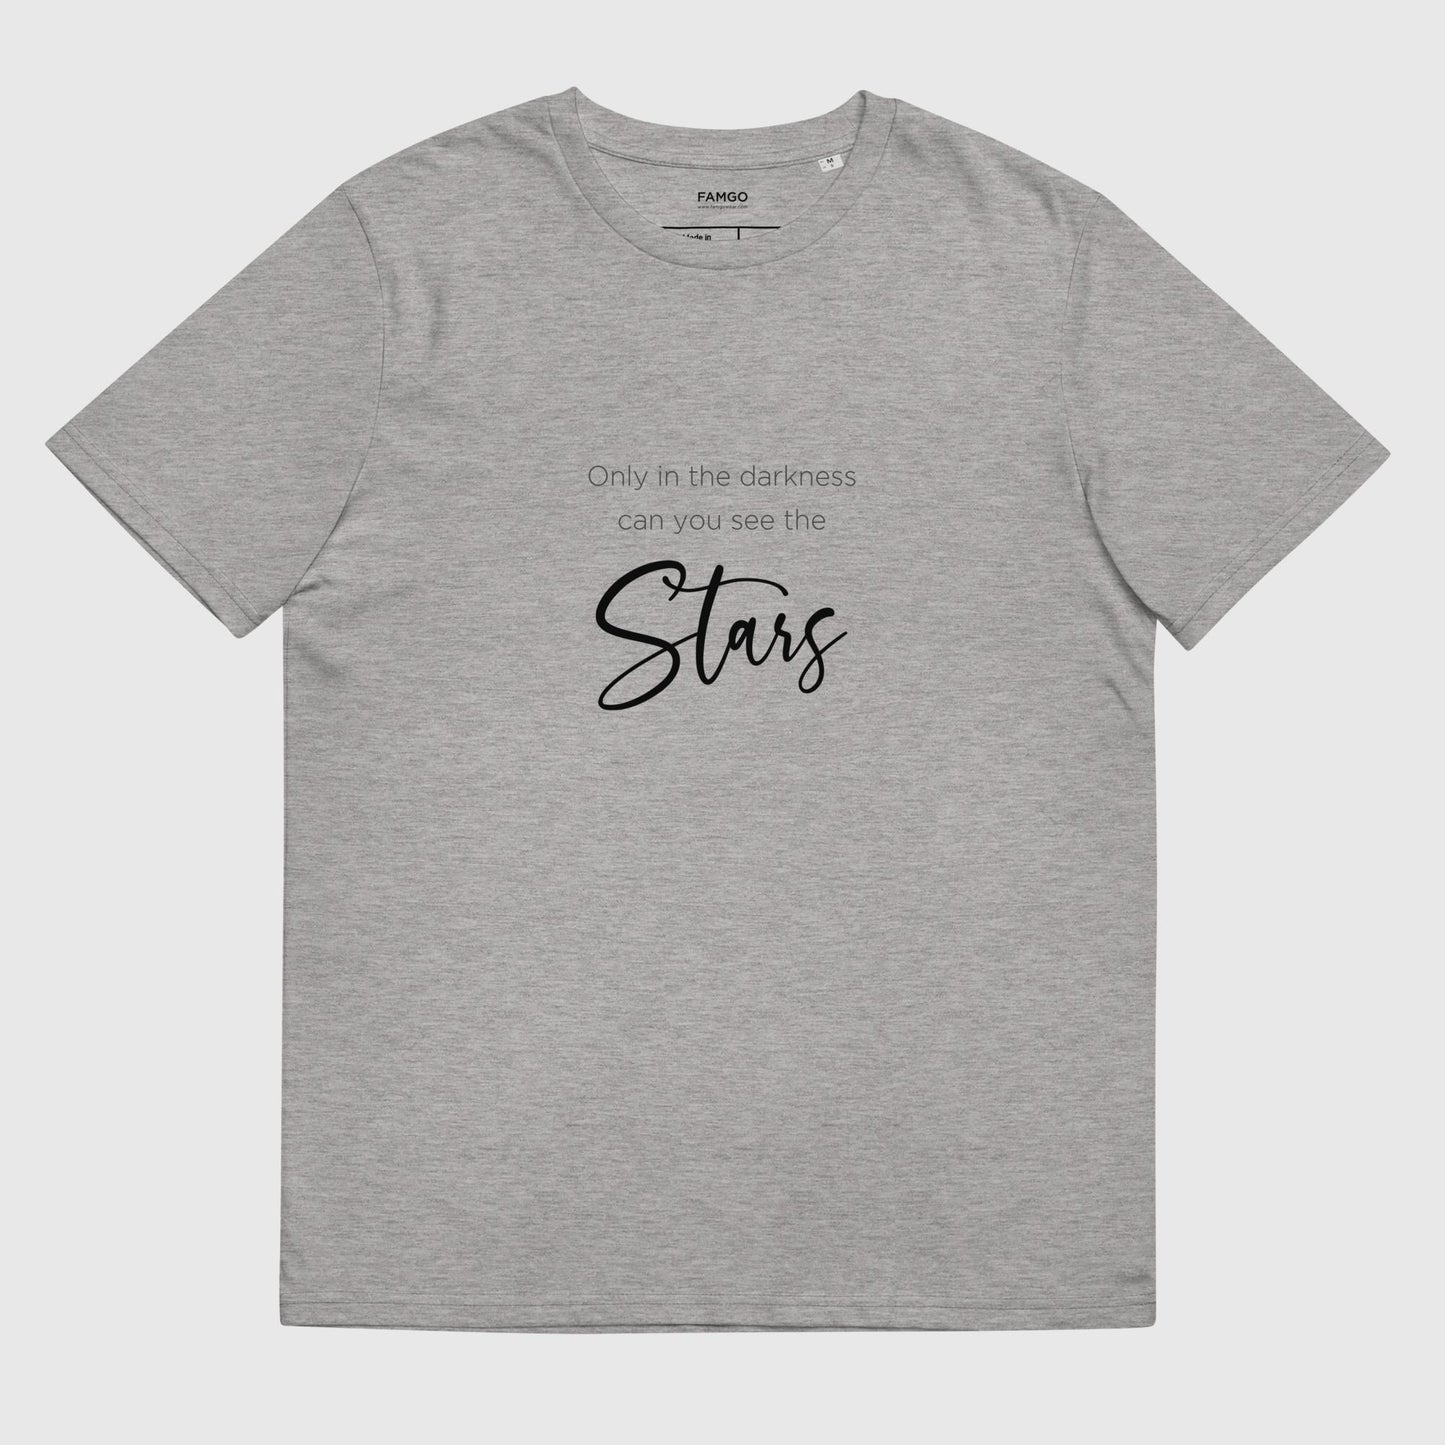 Men's light gray organic cotton t-shirt that features Dr. Martin Luther King Jr's inspirational quote, "Only In The Darkness Can You See The Stars."